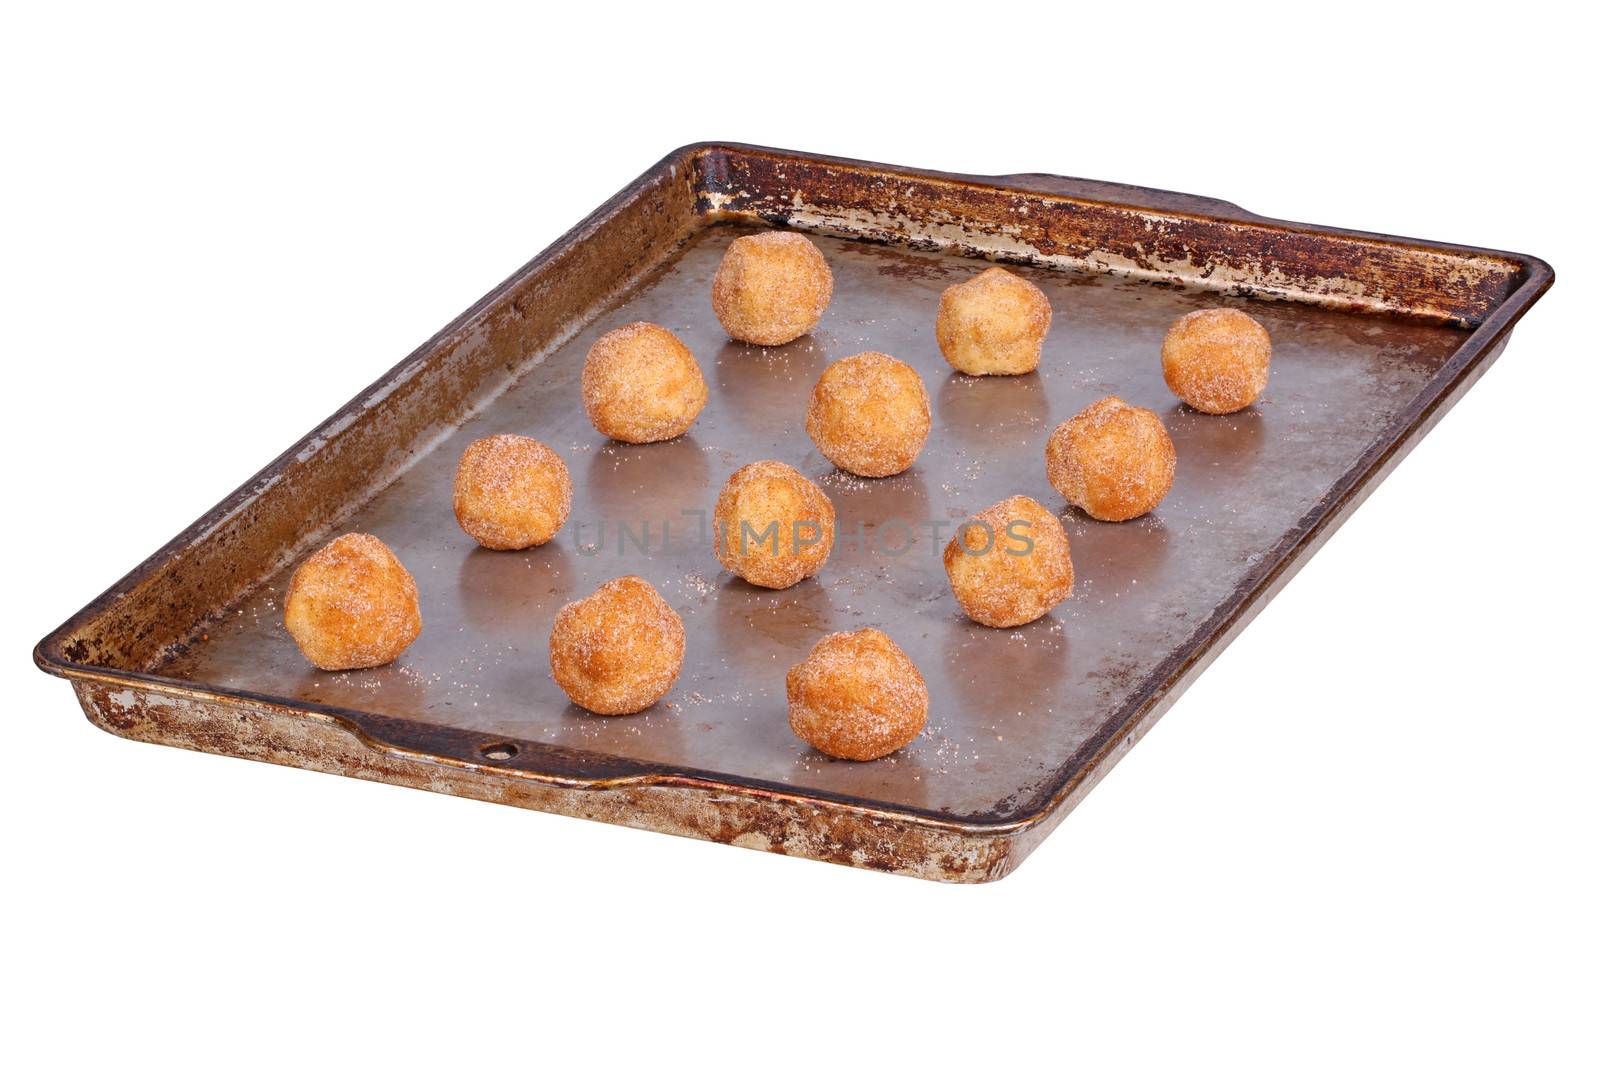 Balls of home-made dough for snickerdoodle cookies on a pan ready to be baked isolated against a white background